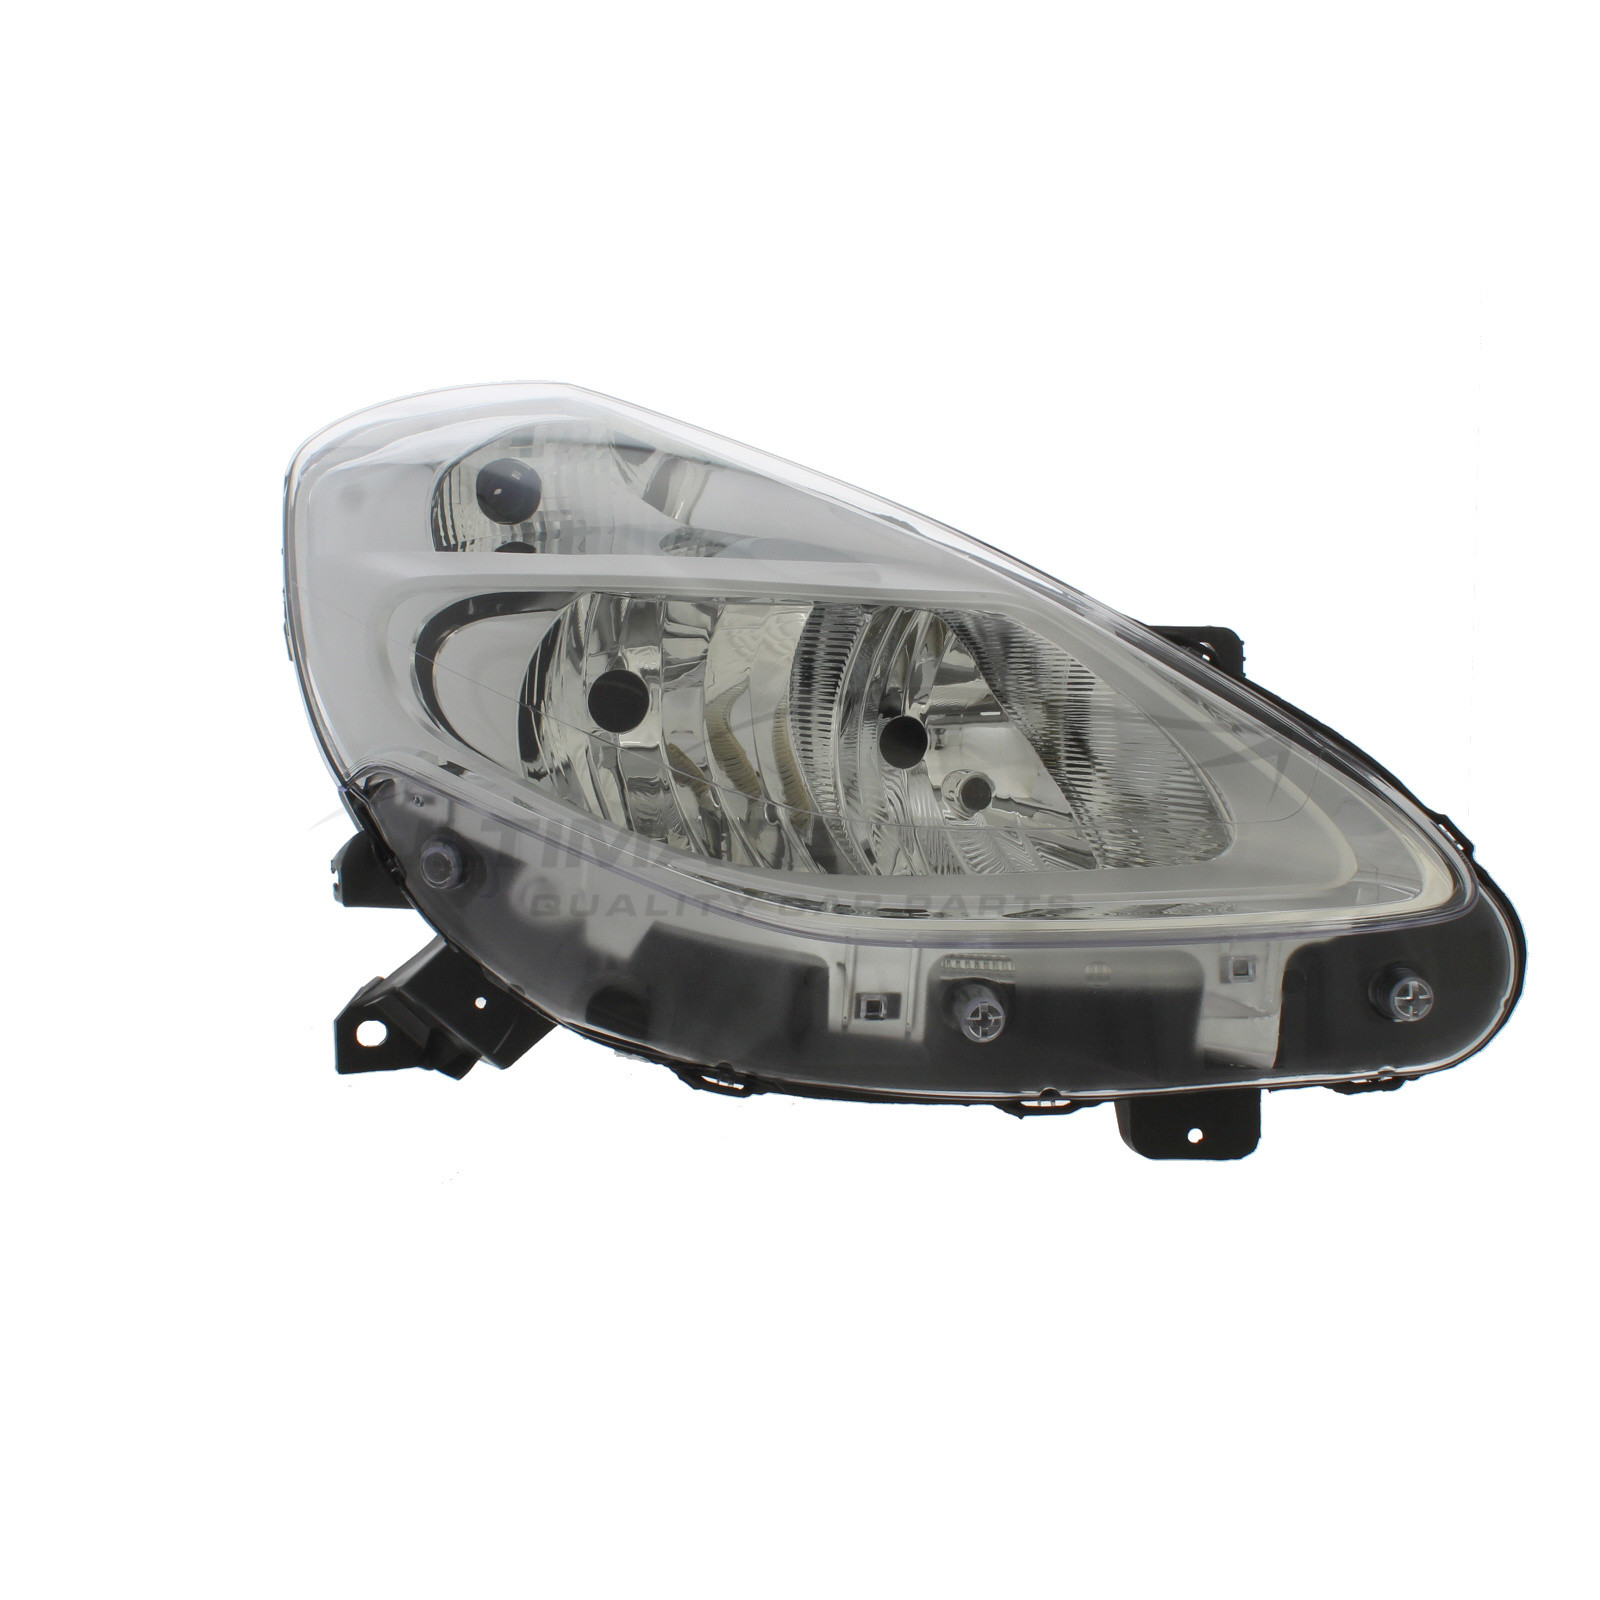 Renault Clio 2009-2013 Halogen, Electric Without Motor, Chrome Headlight / Headlamp Drivers Side (RH)